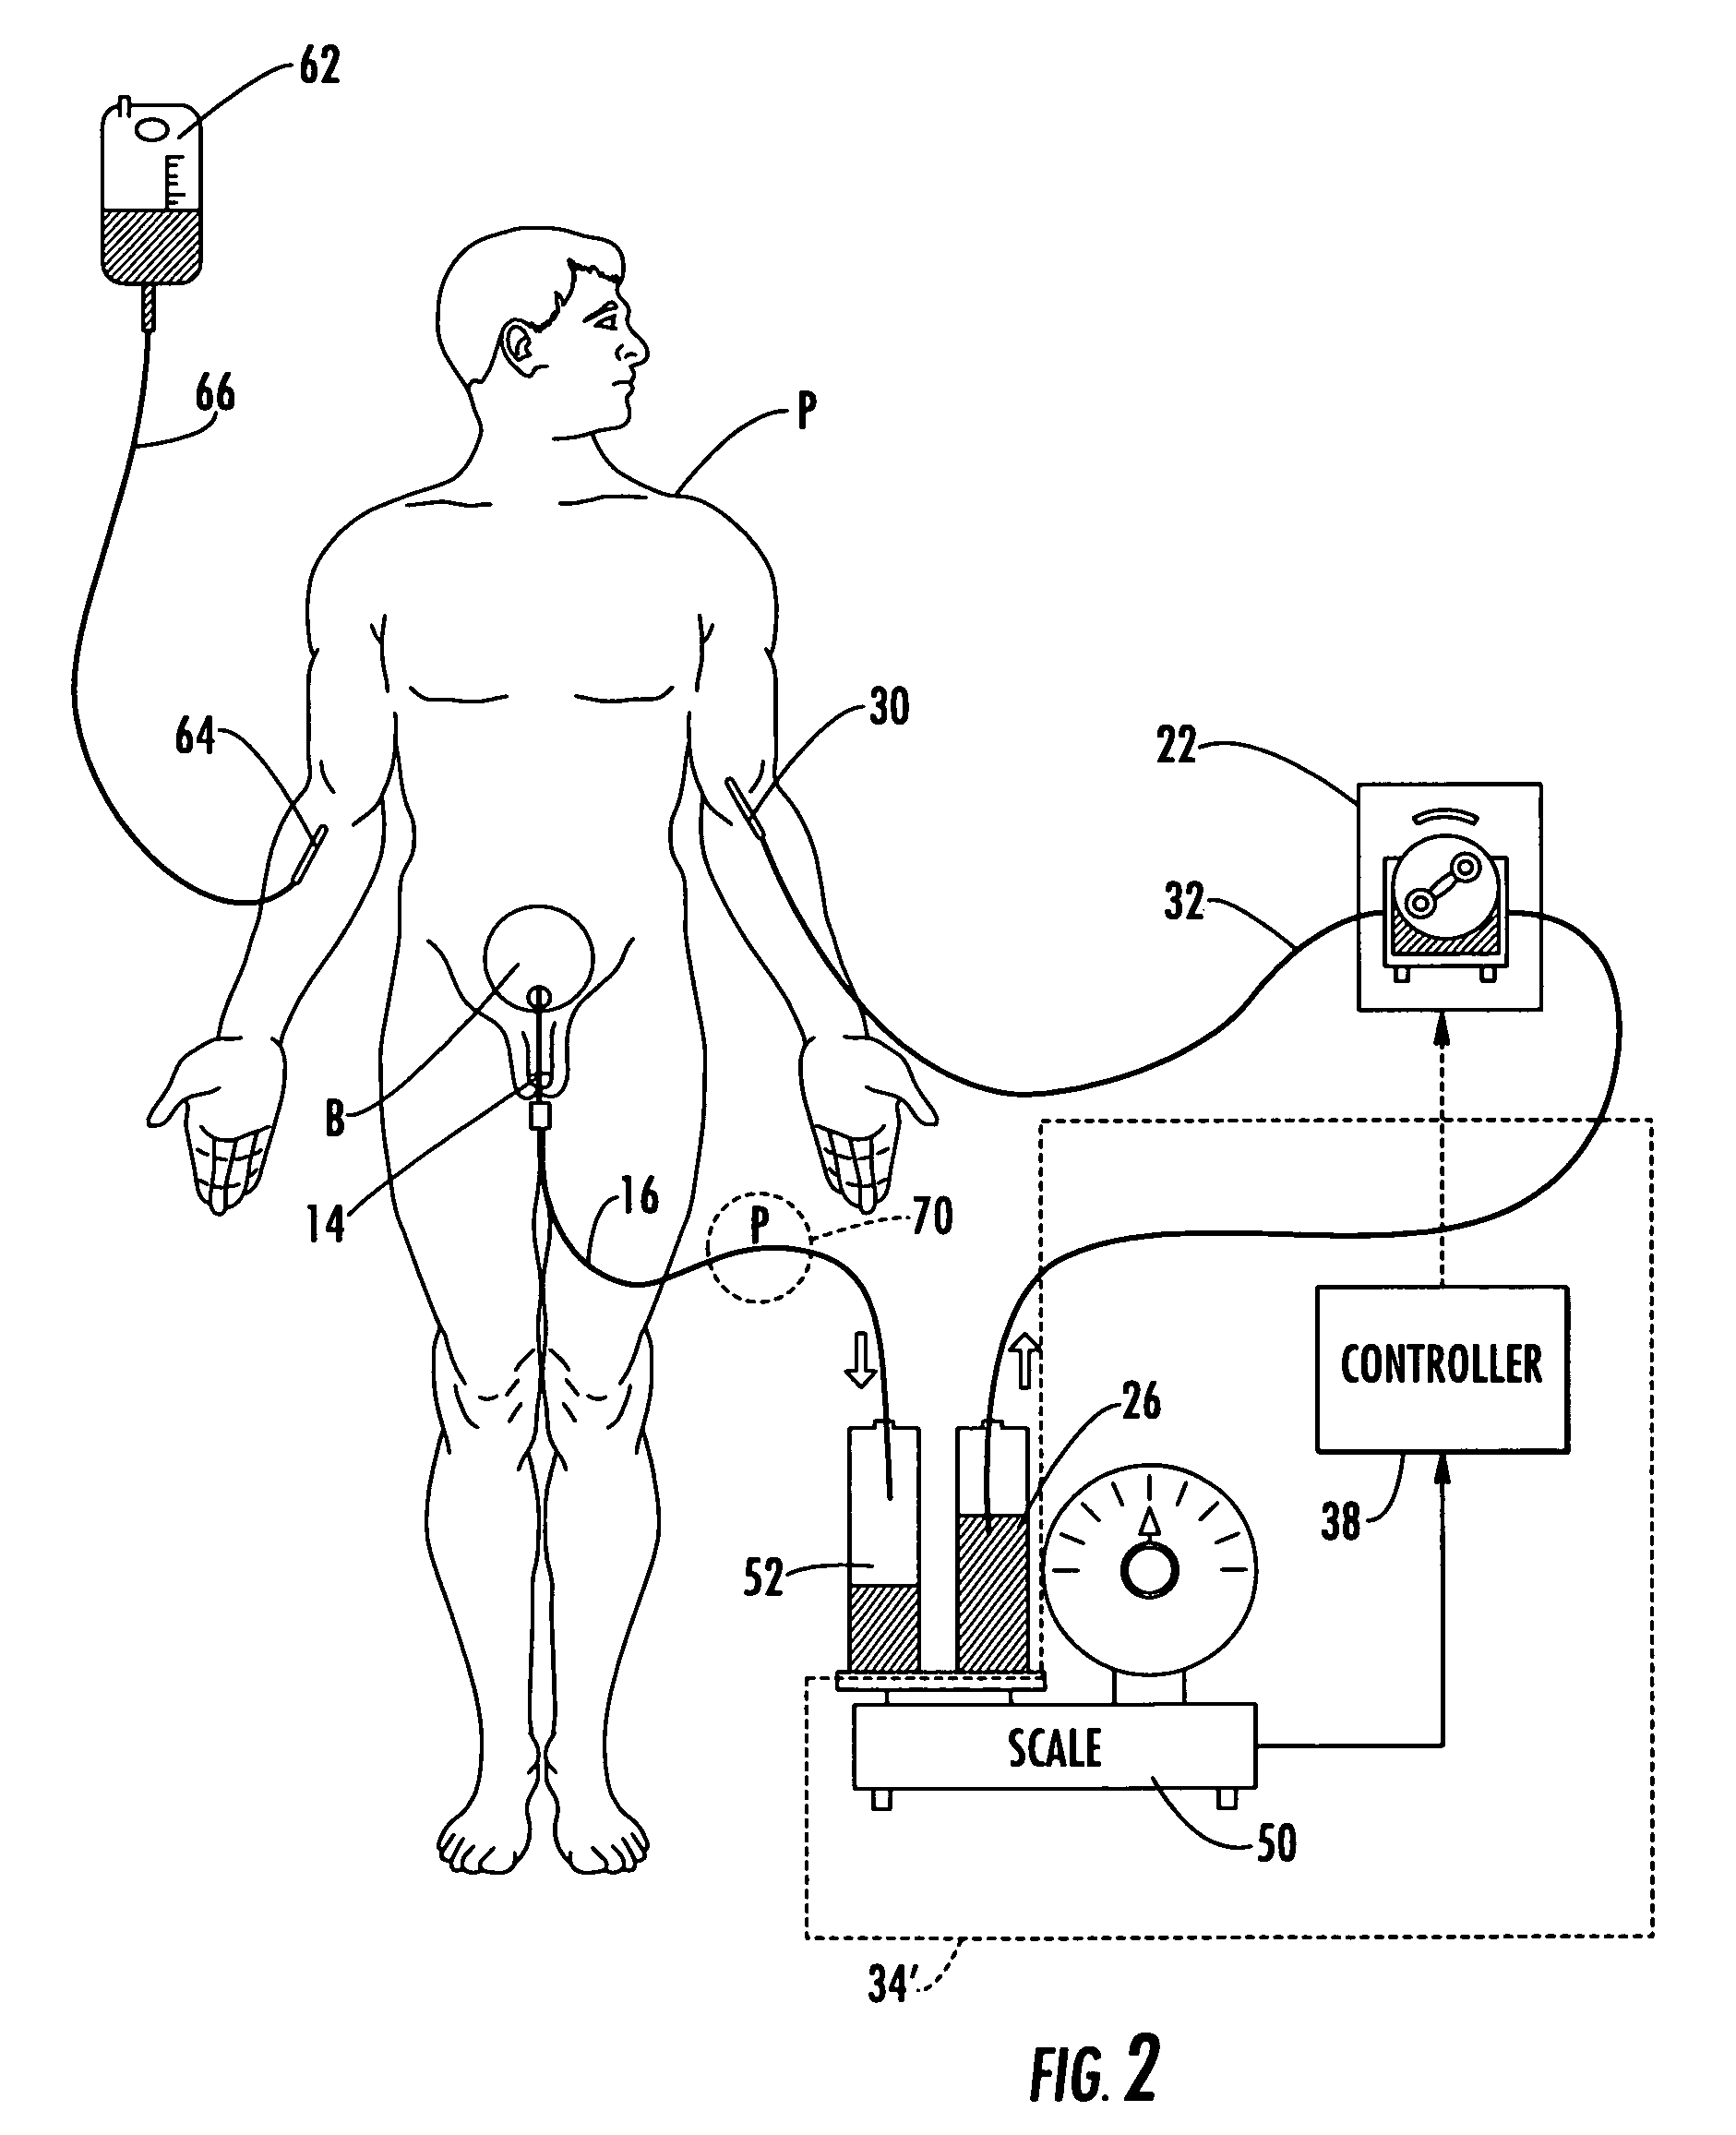 Patient hydration system with abnormal condition sensing